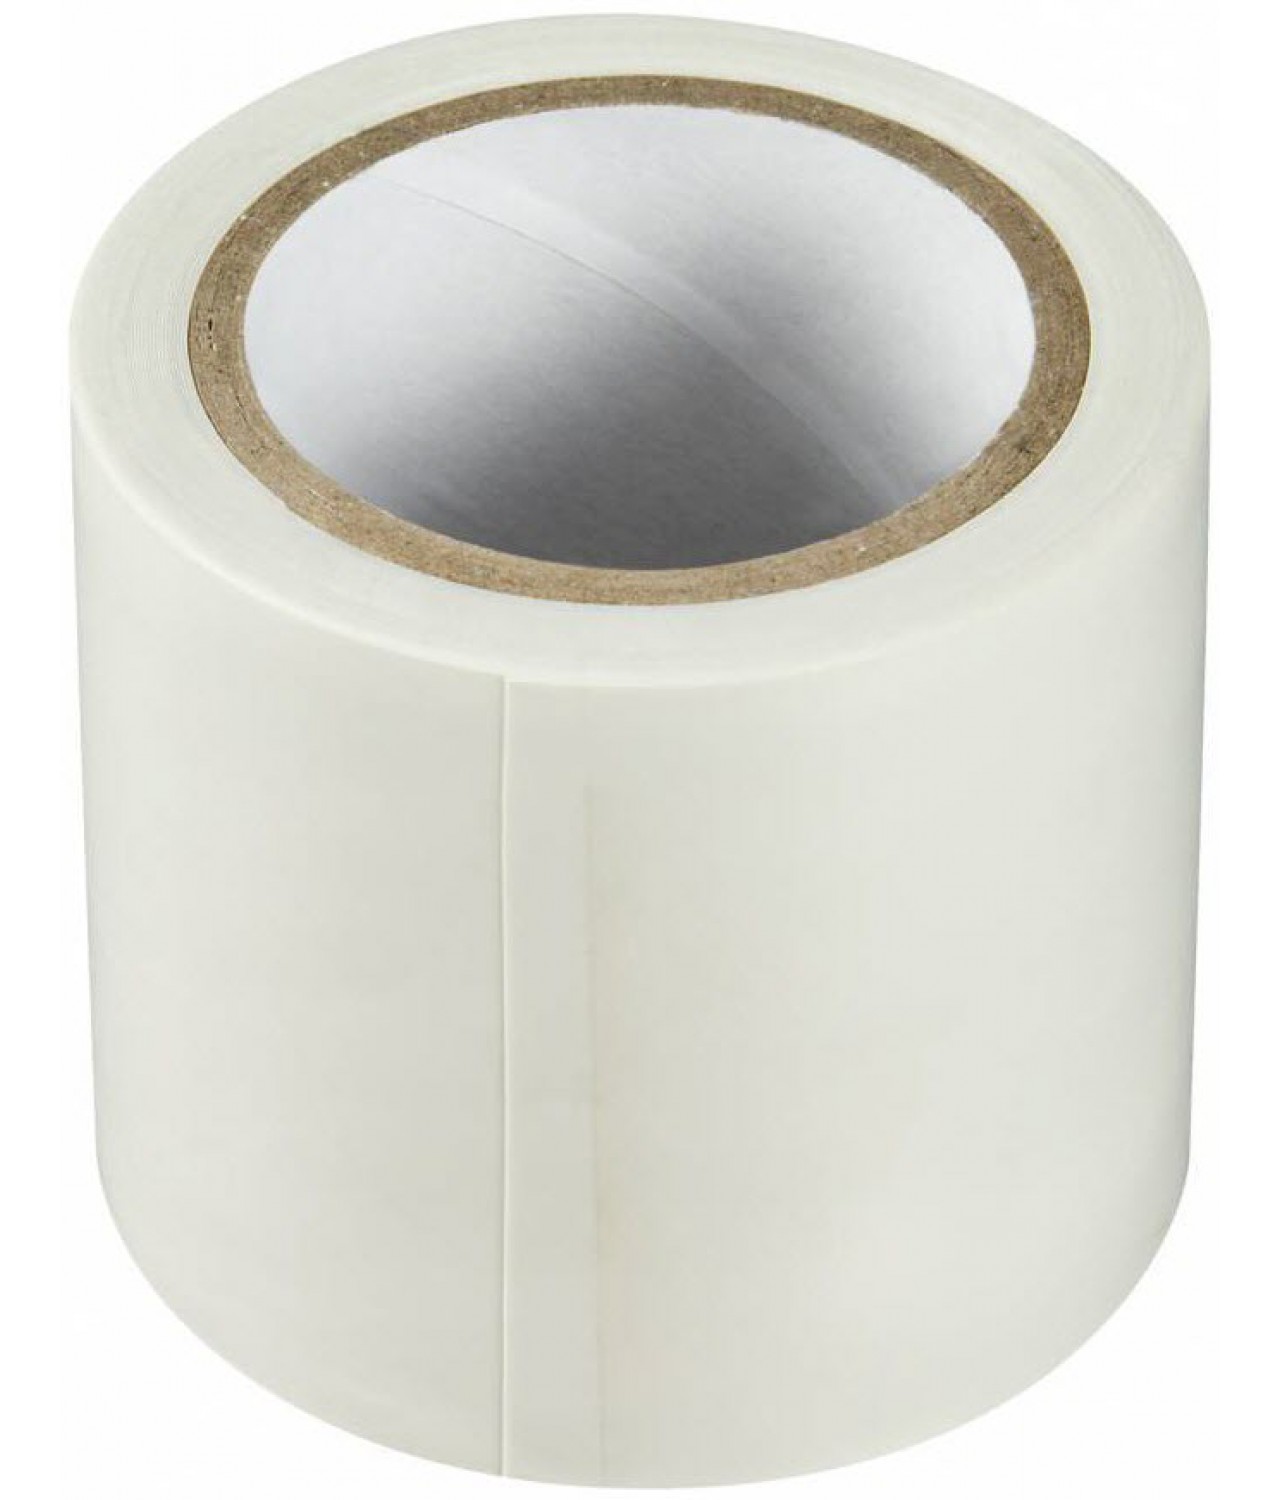 Adhesive PVC tape for plastic ducts sealing, 5.0 cm x 5 m, TAP - An example